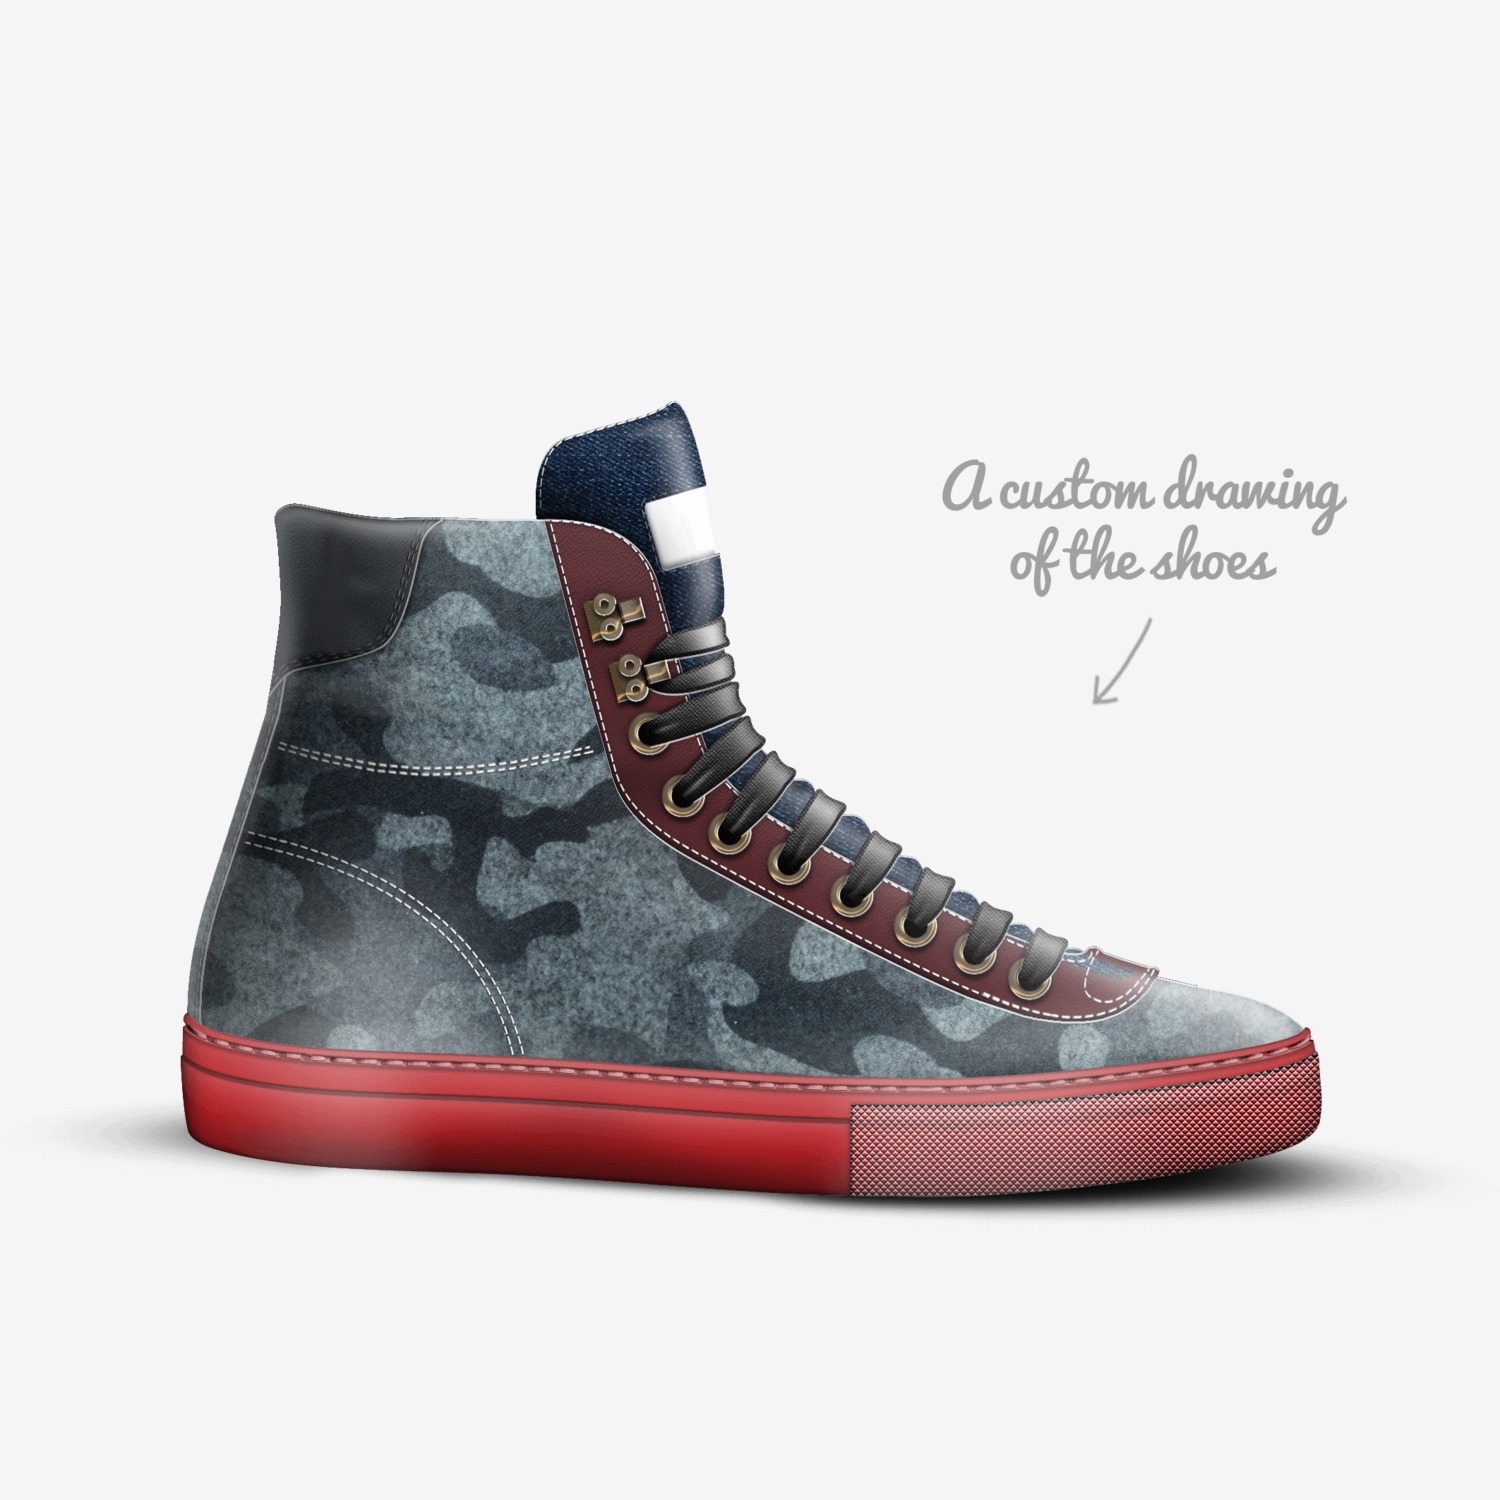 KIKS  A Custom Shoe concept by Ember Willow